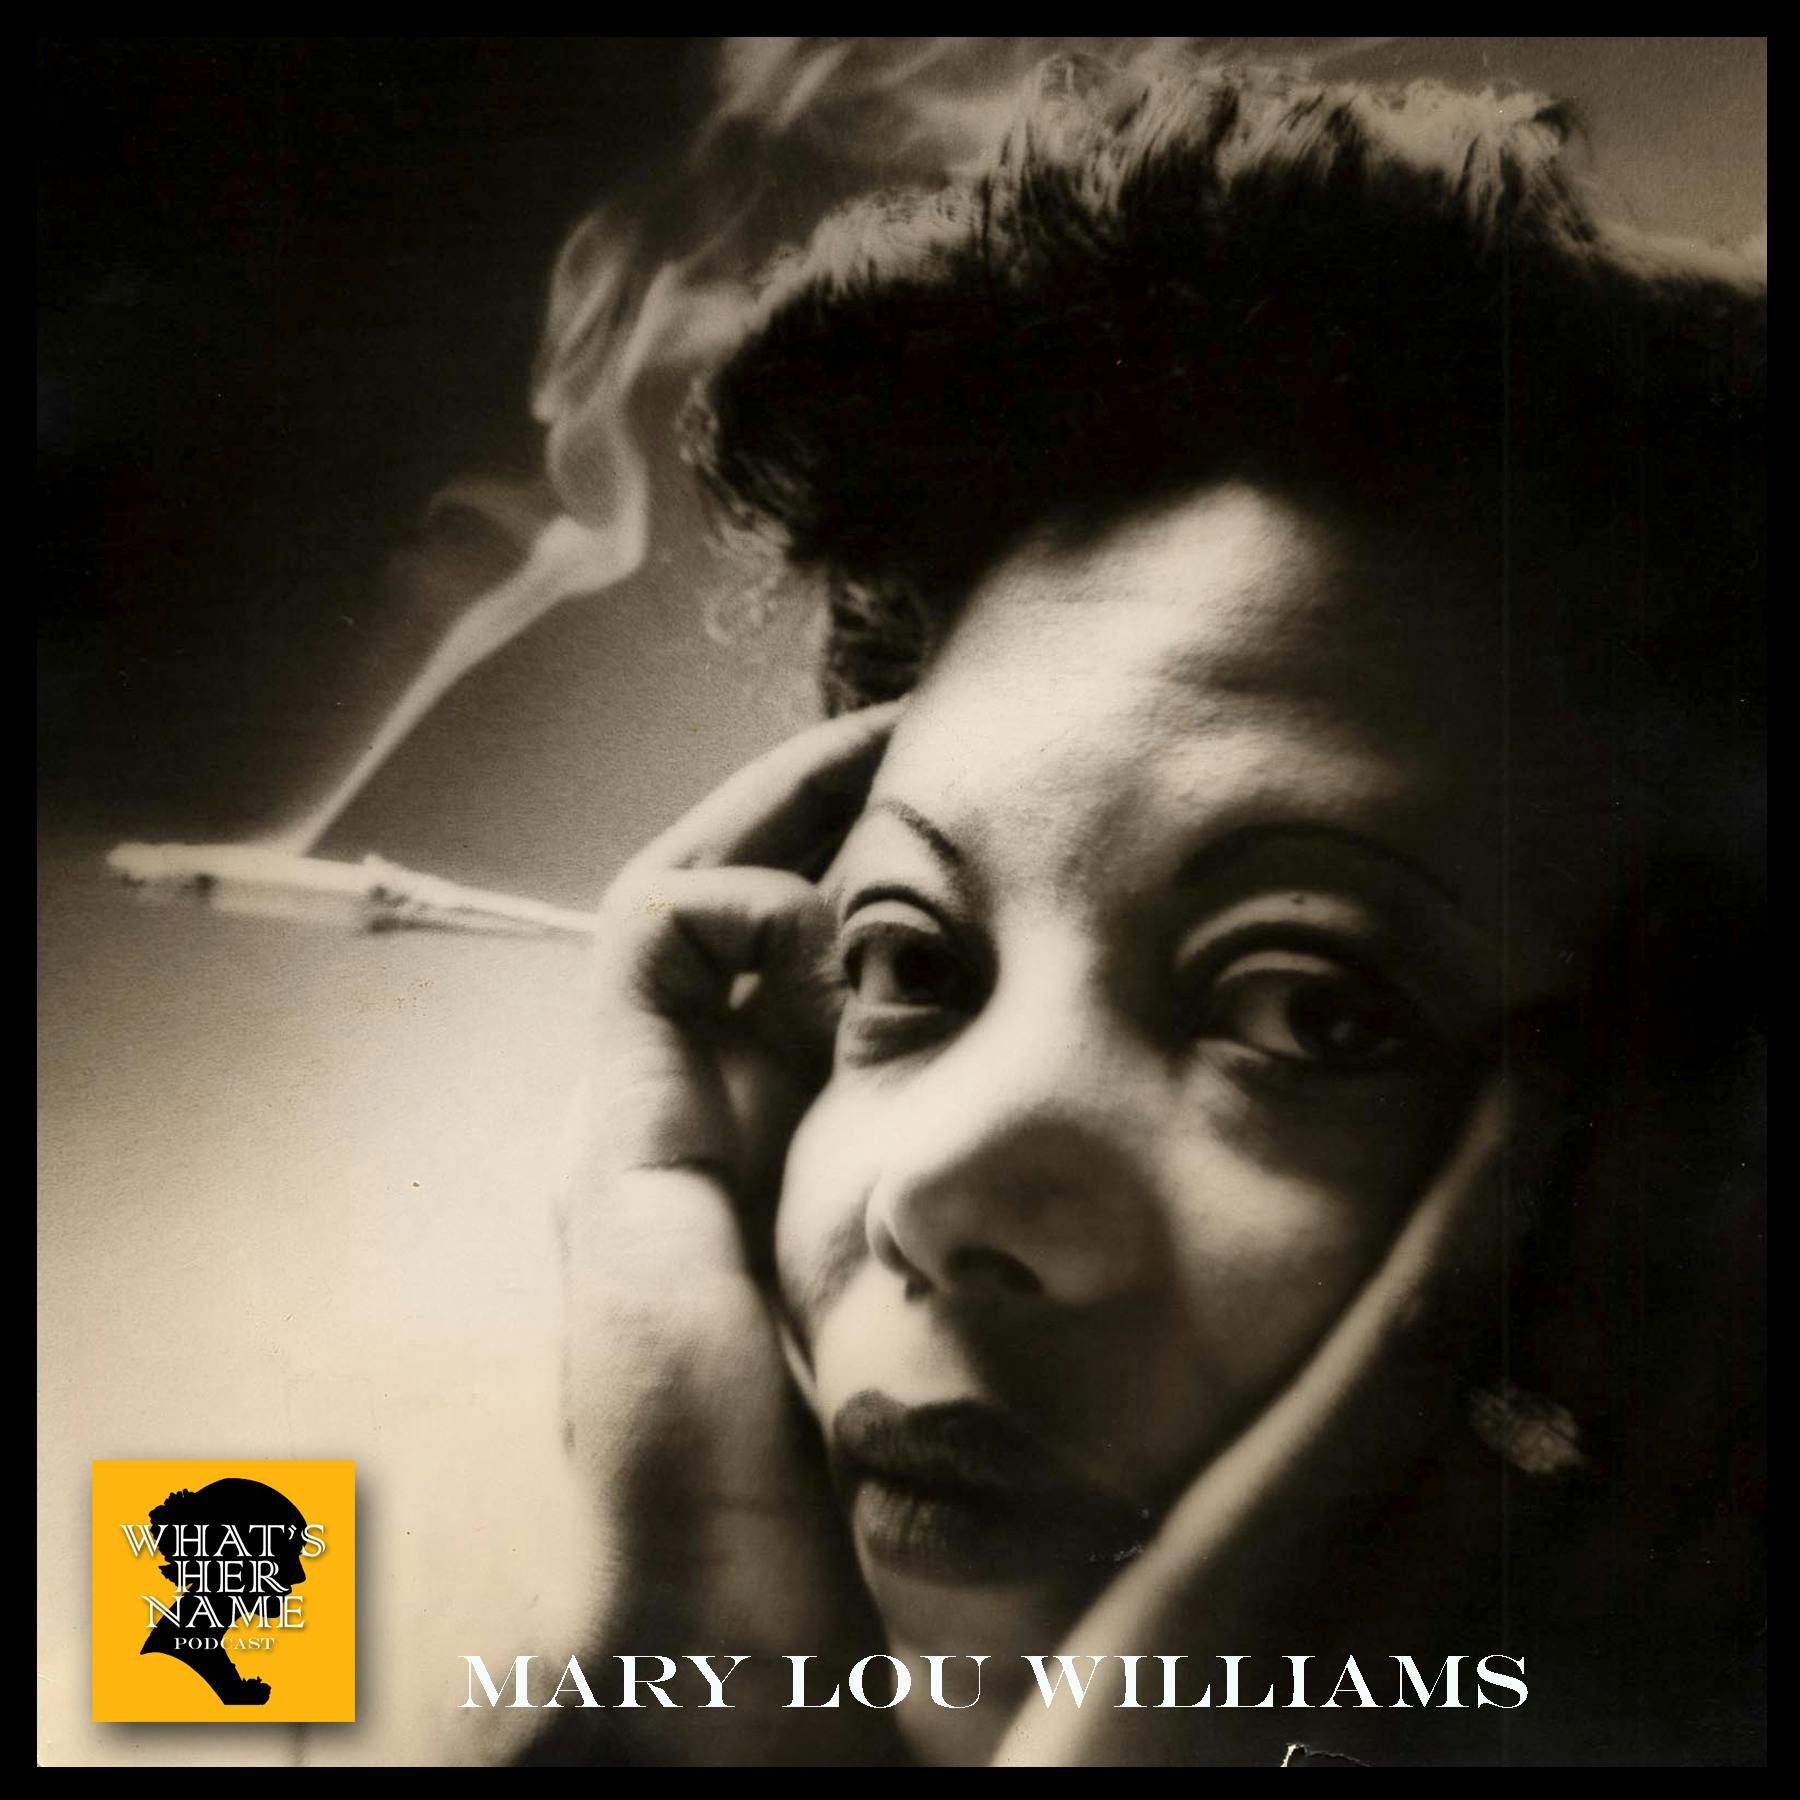 THE MUSICIAN Mary Lou Williams